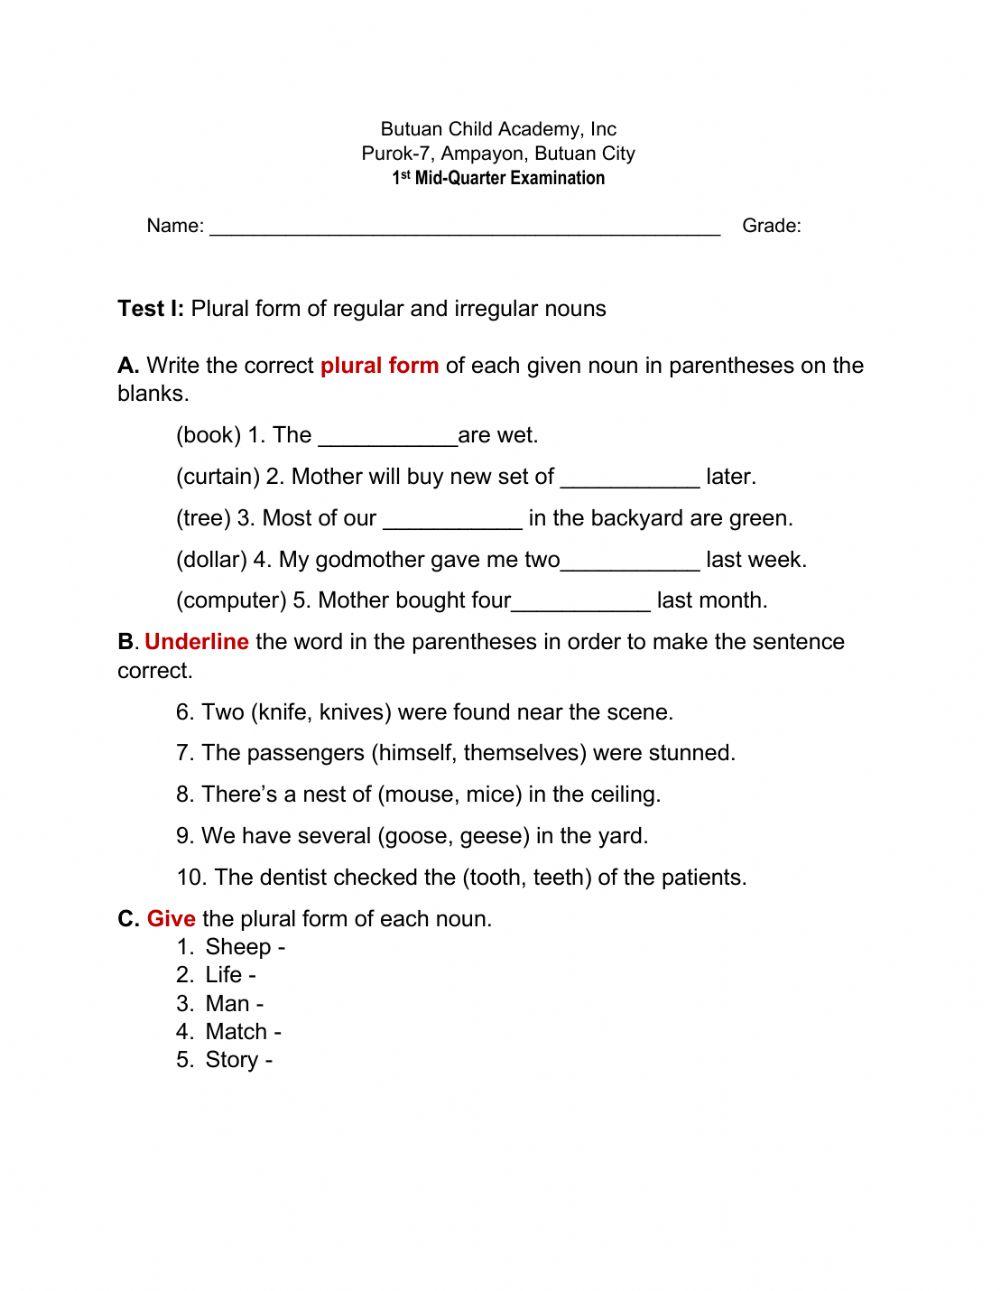 quantifiers-of-mass-and-count-nouns-worksheet-live-worksheets